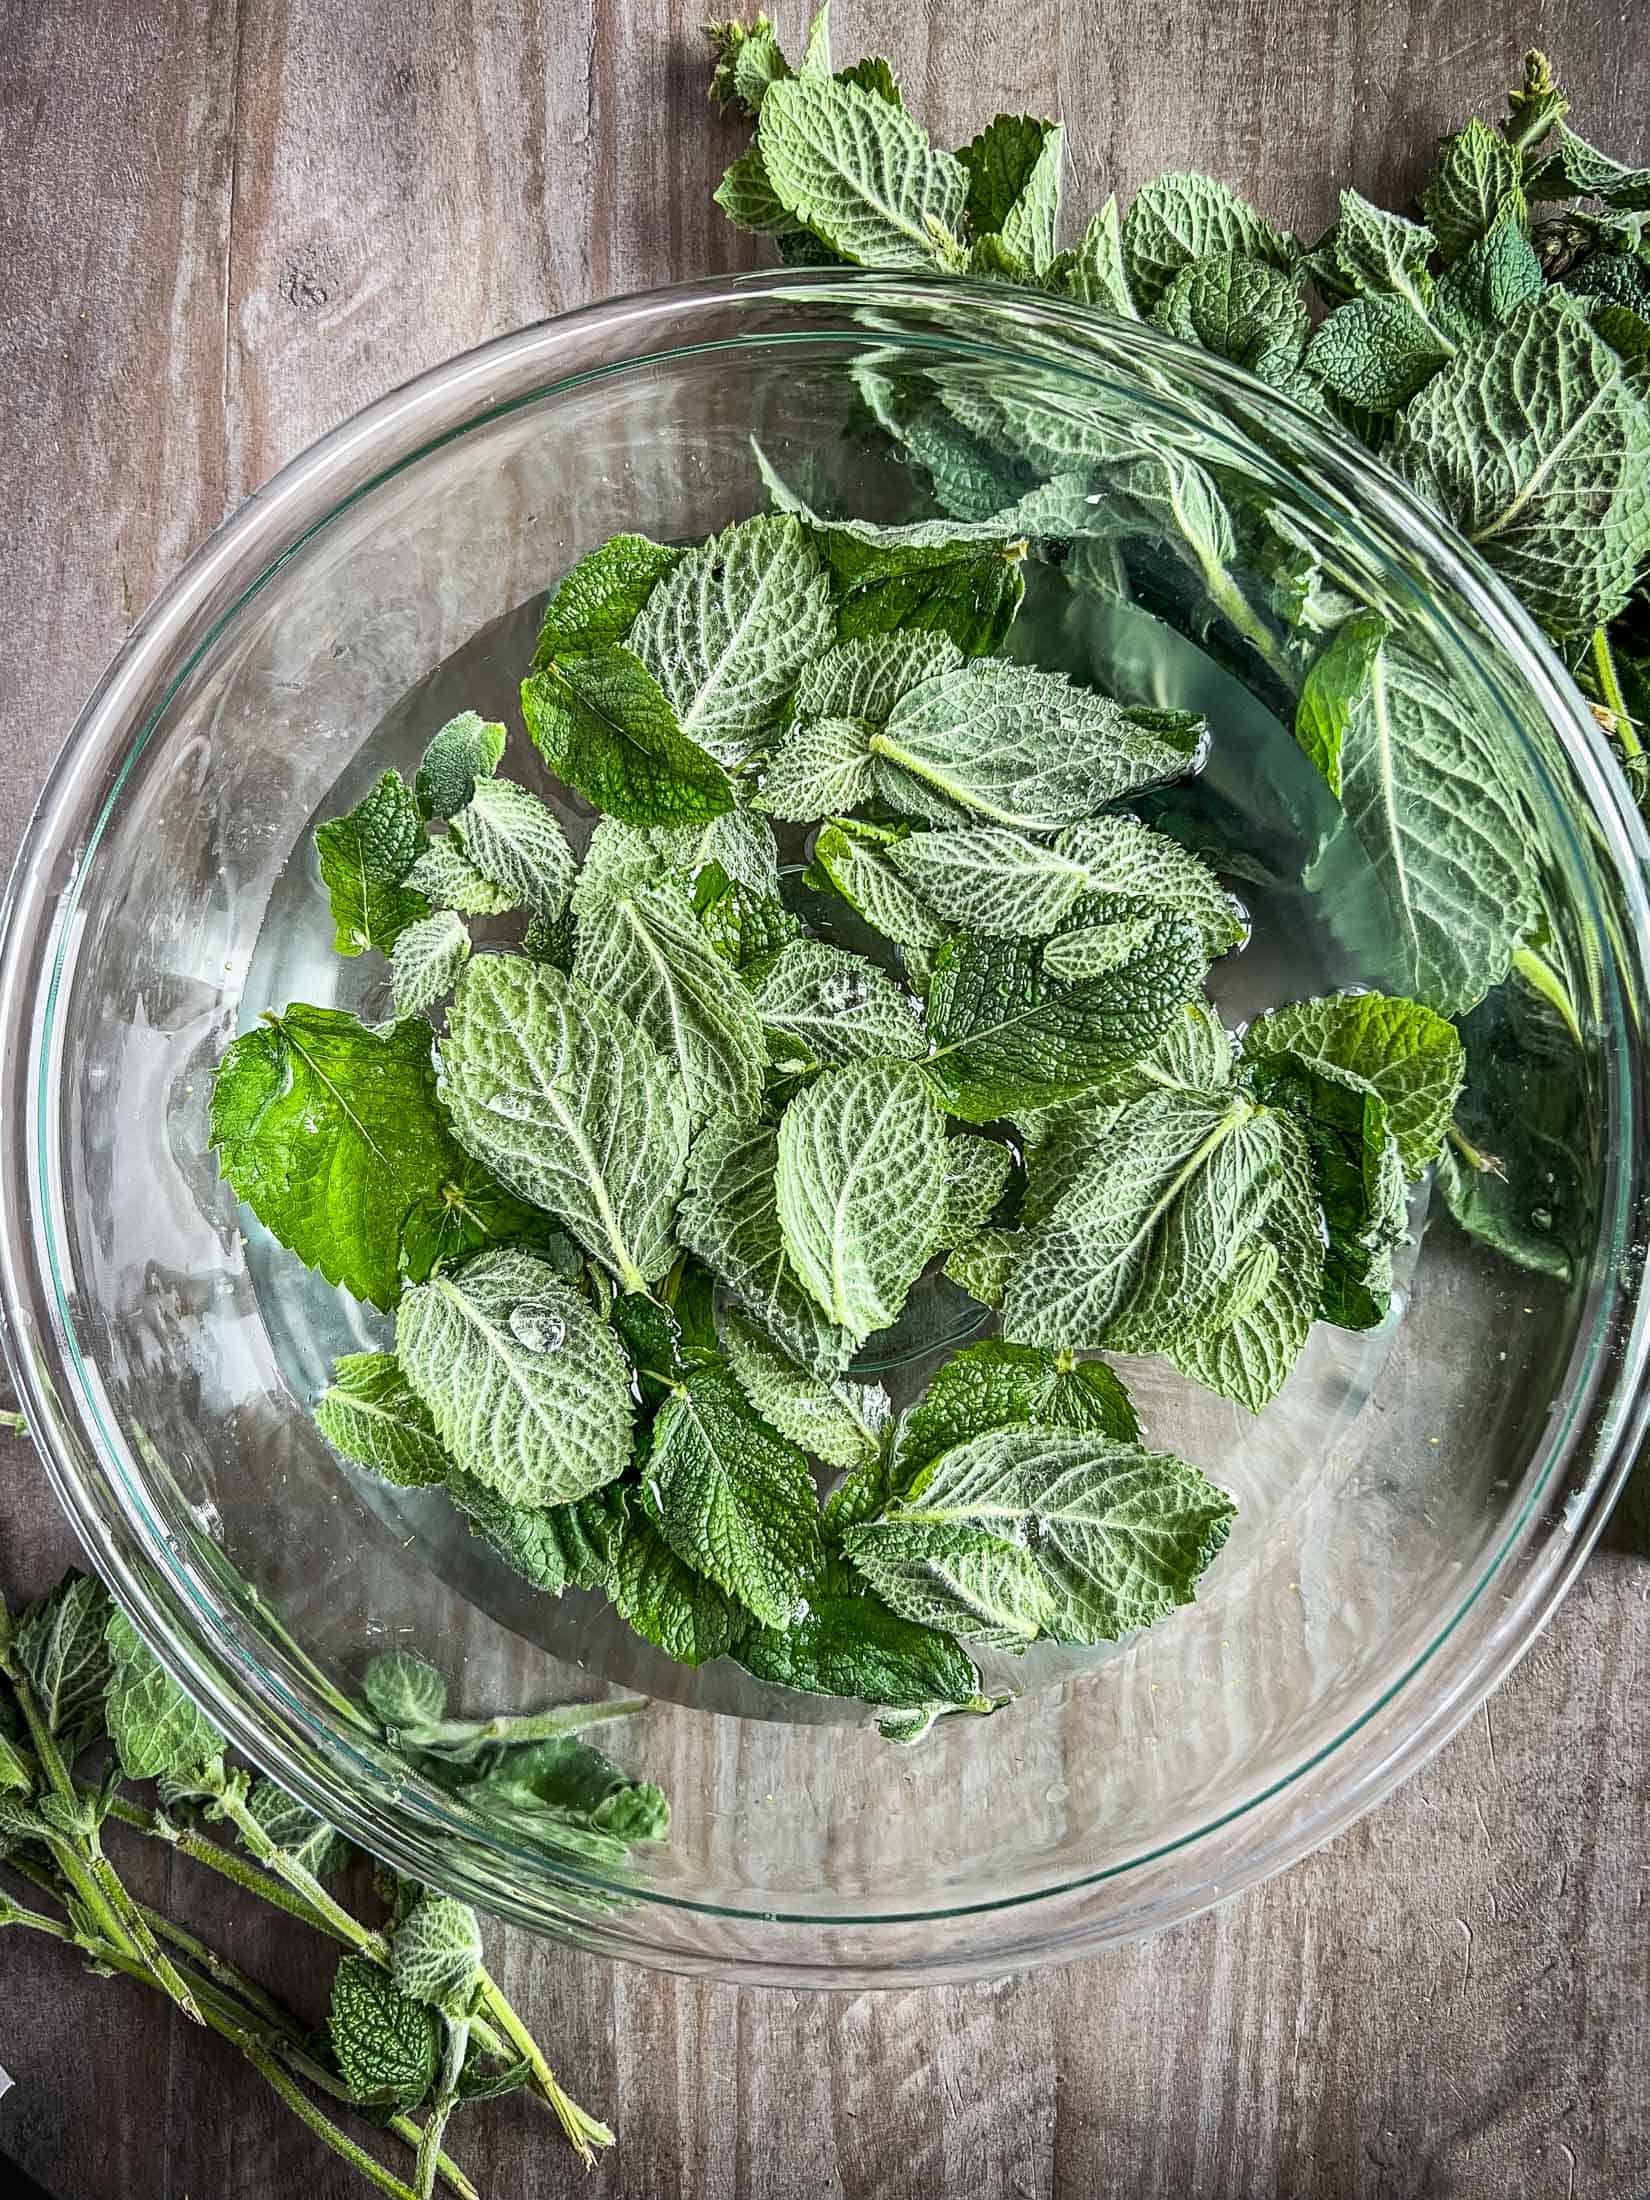 Mint leaves in a glass bowl of water.